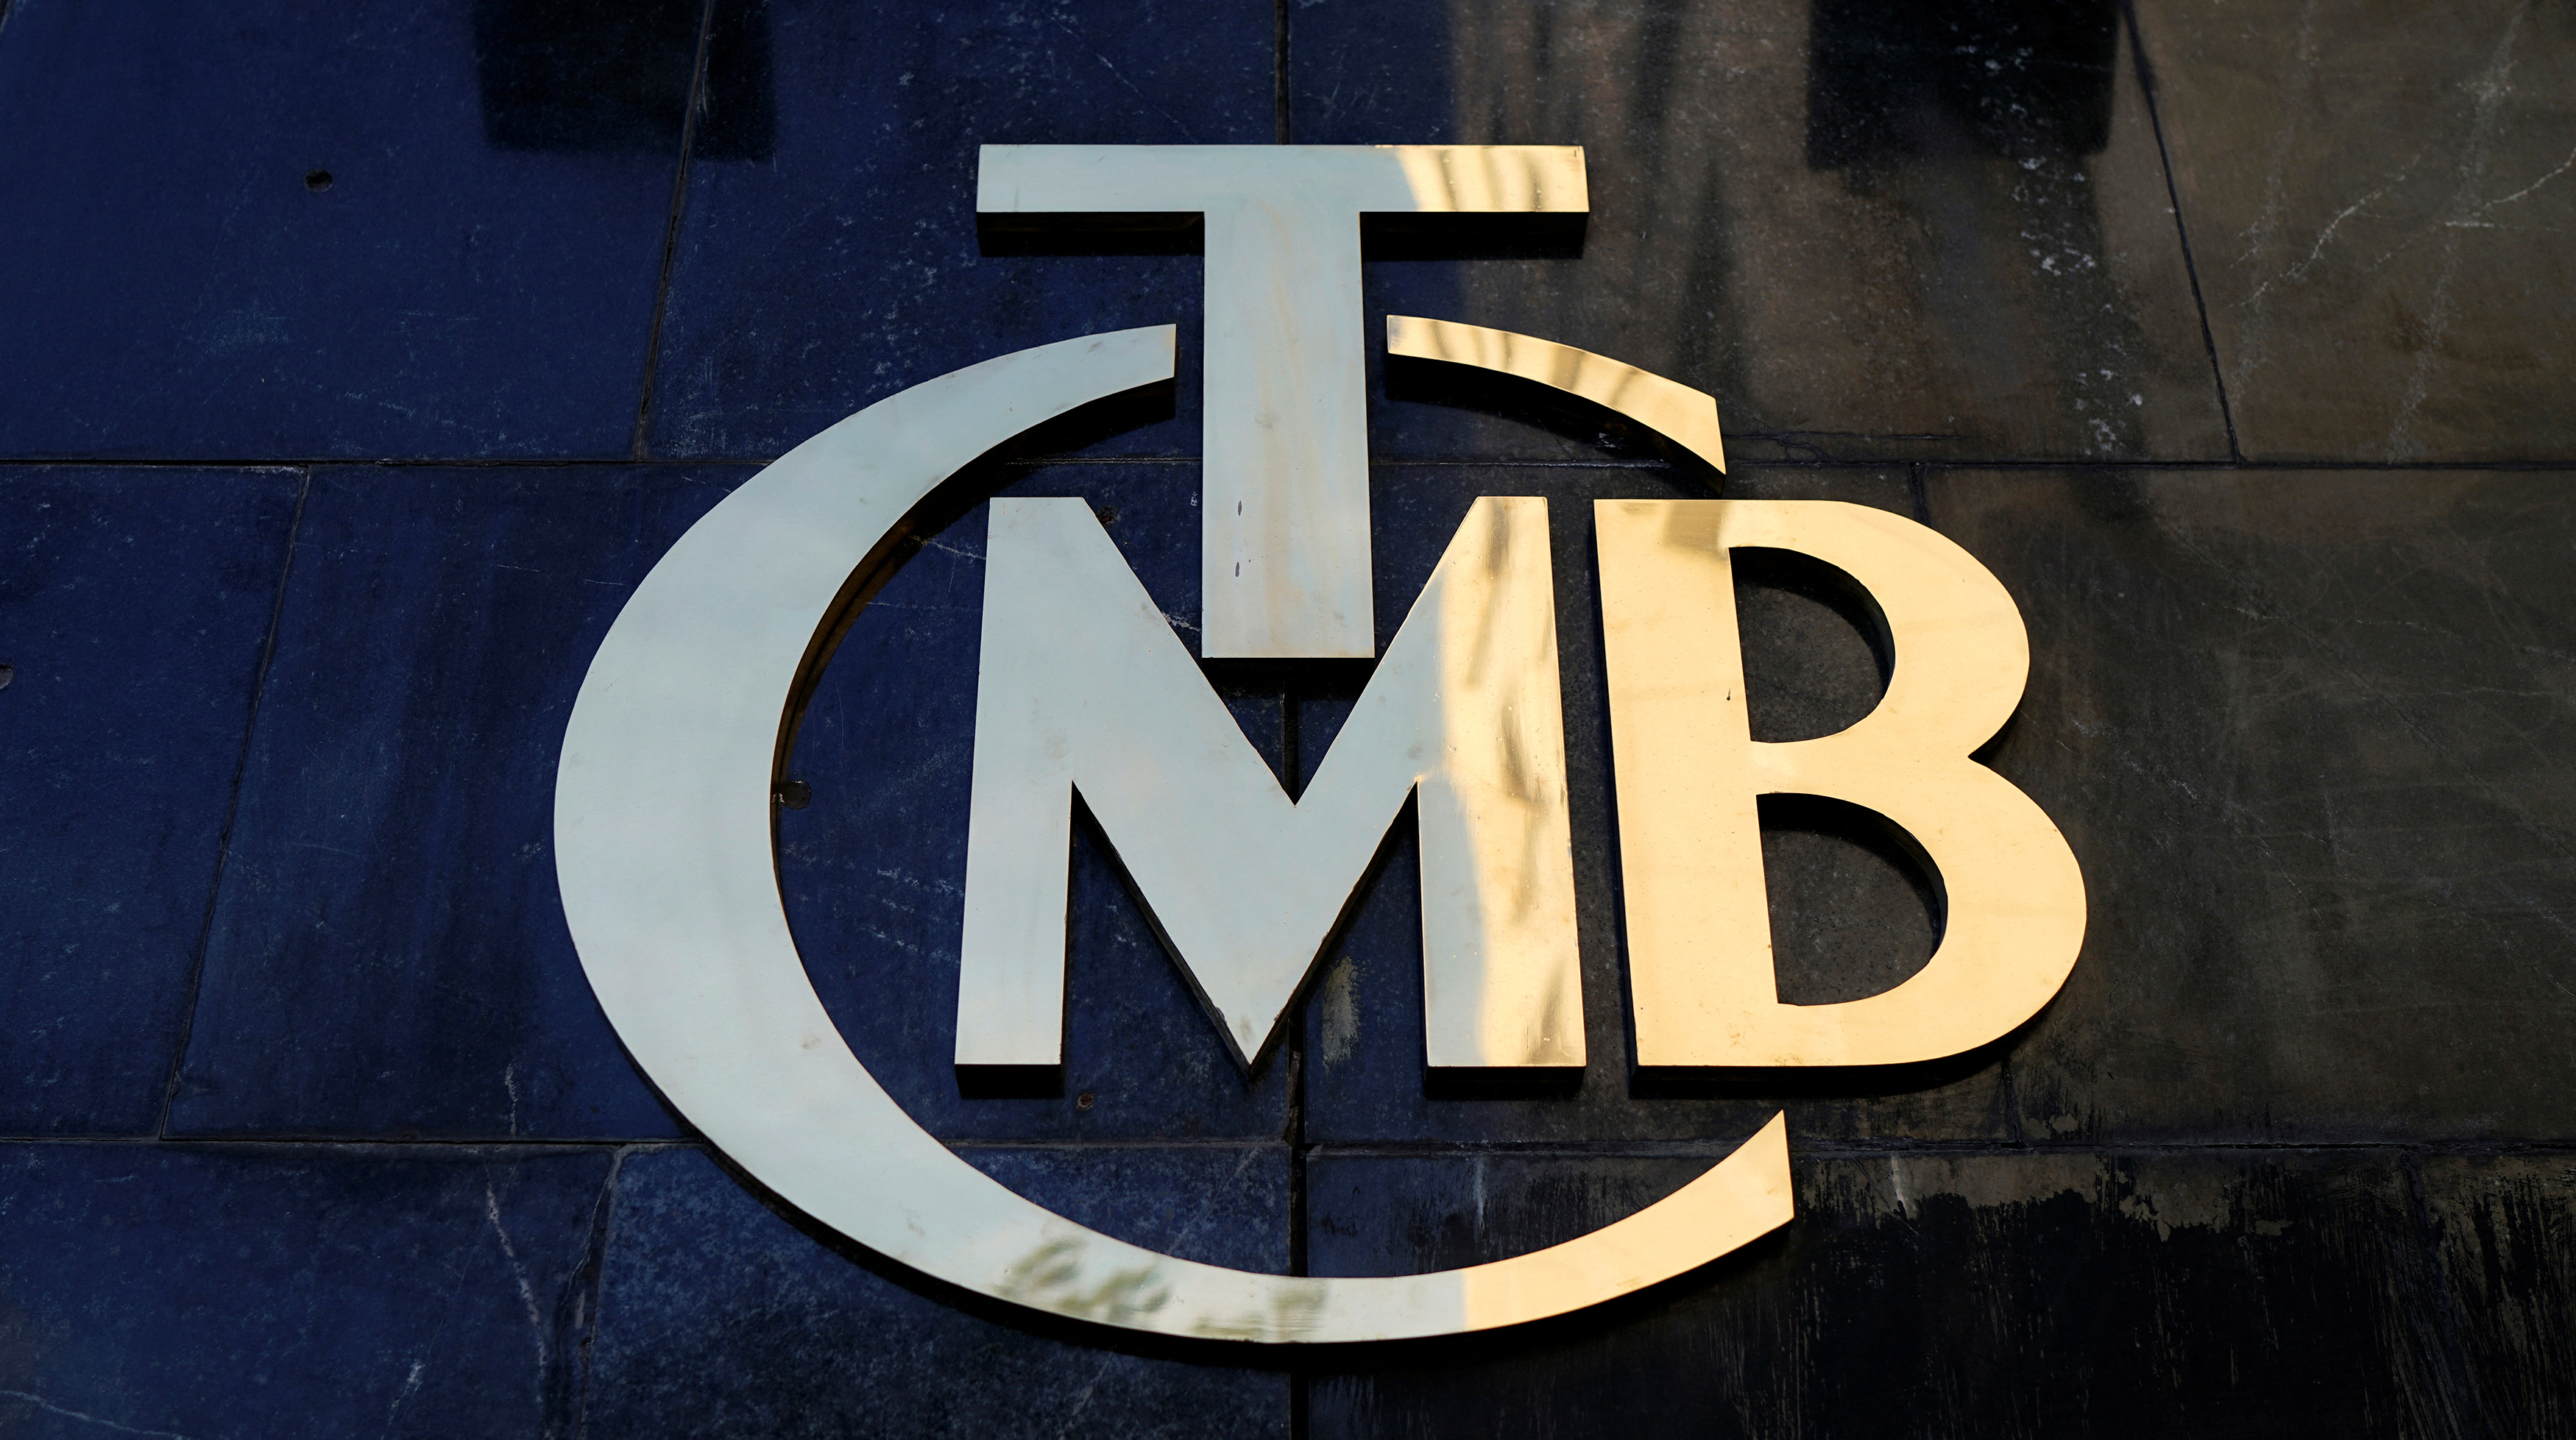 A logo of Turkey's Central Bank is pictured at the entrance of the bank's headquarters in Ankara